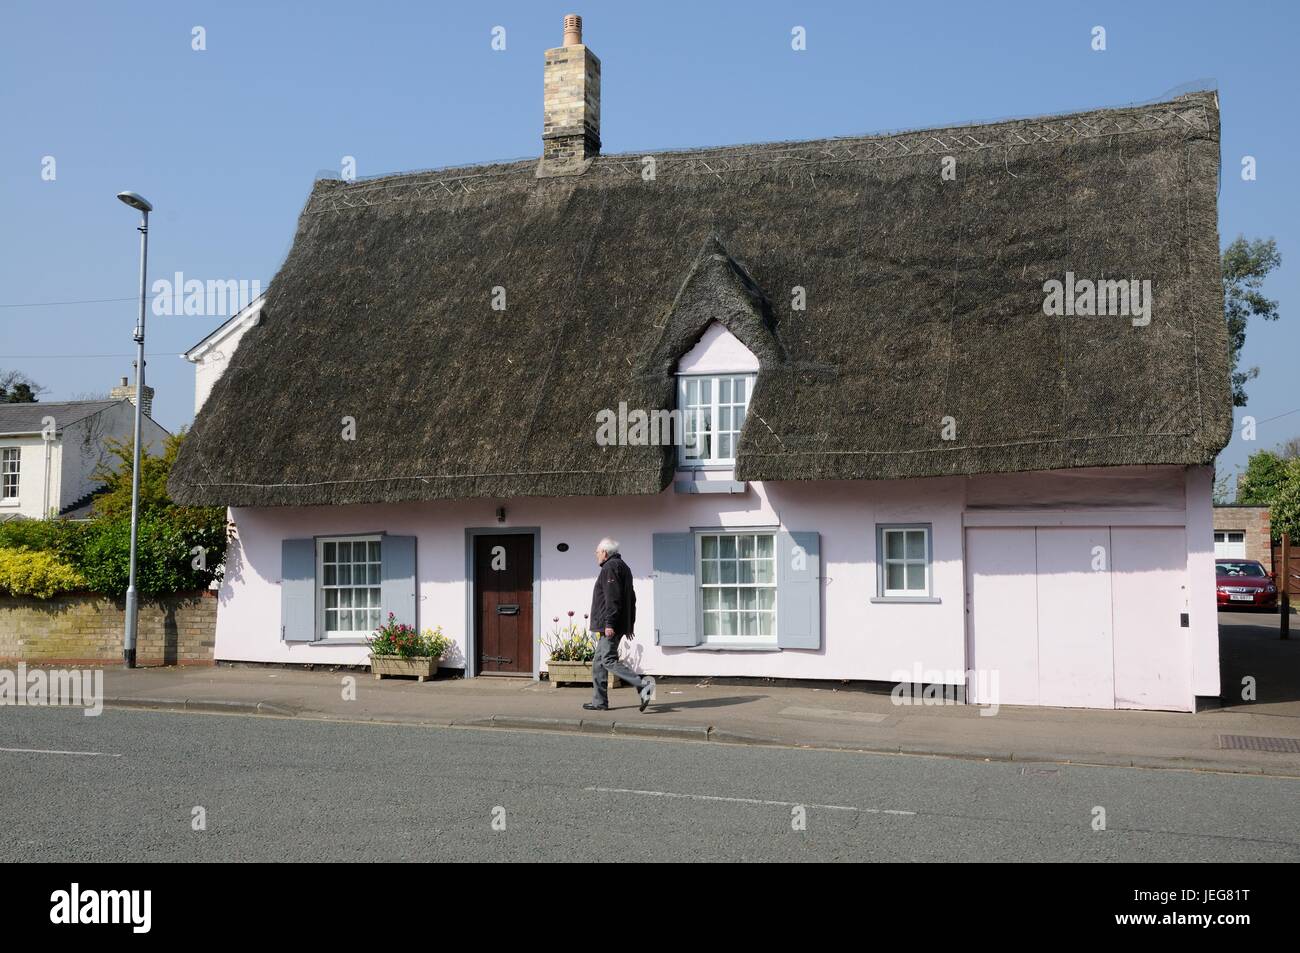 No 68 High Street, Great Shelford, Cambridgeshire, is timber-framed and plastered cottage with a thatched roof of mid-18th century date. Stock Photo